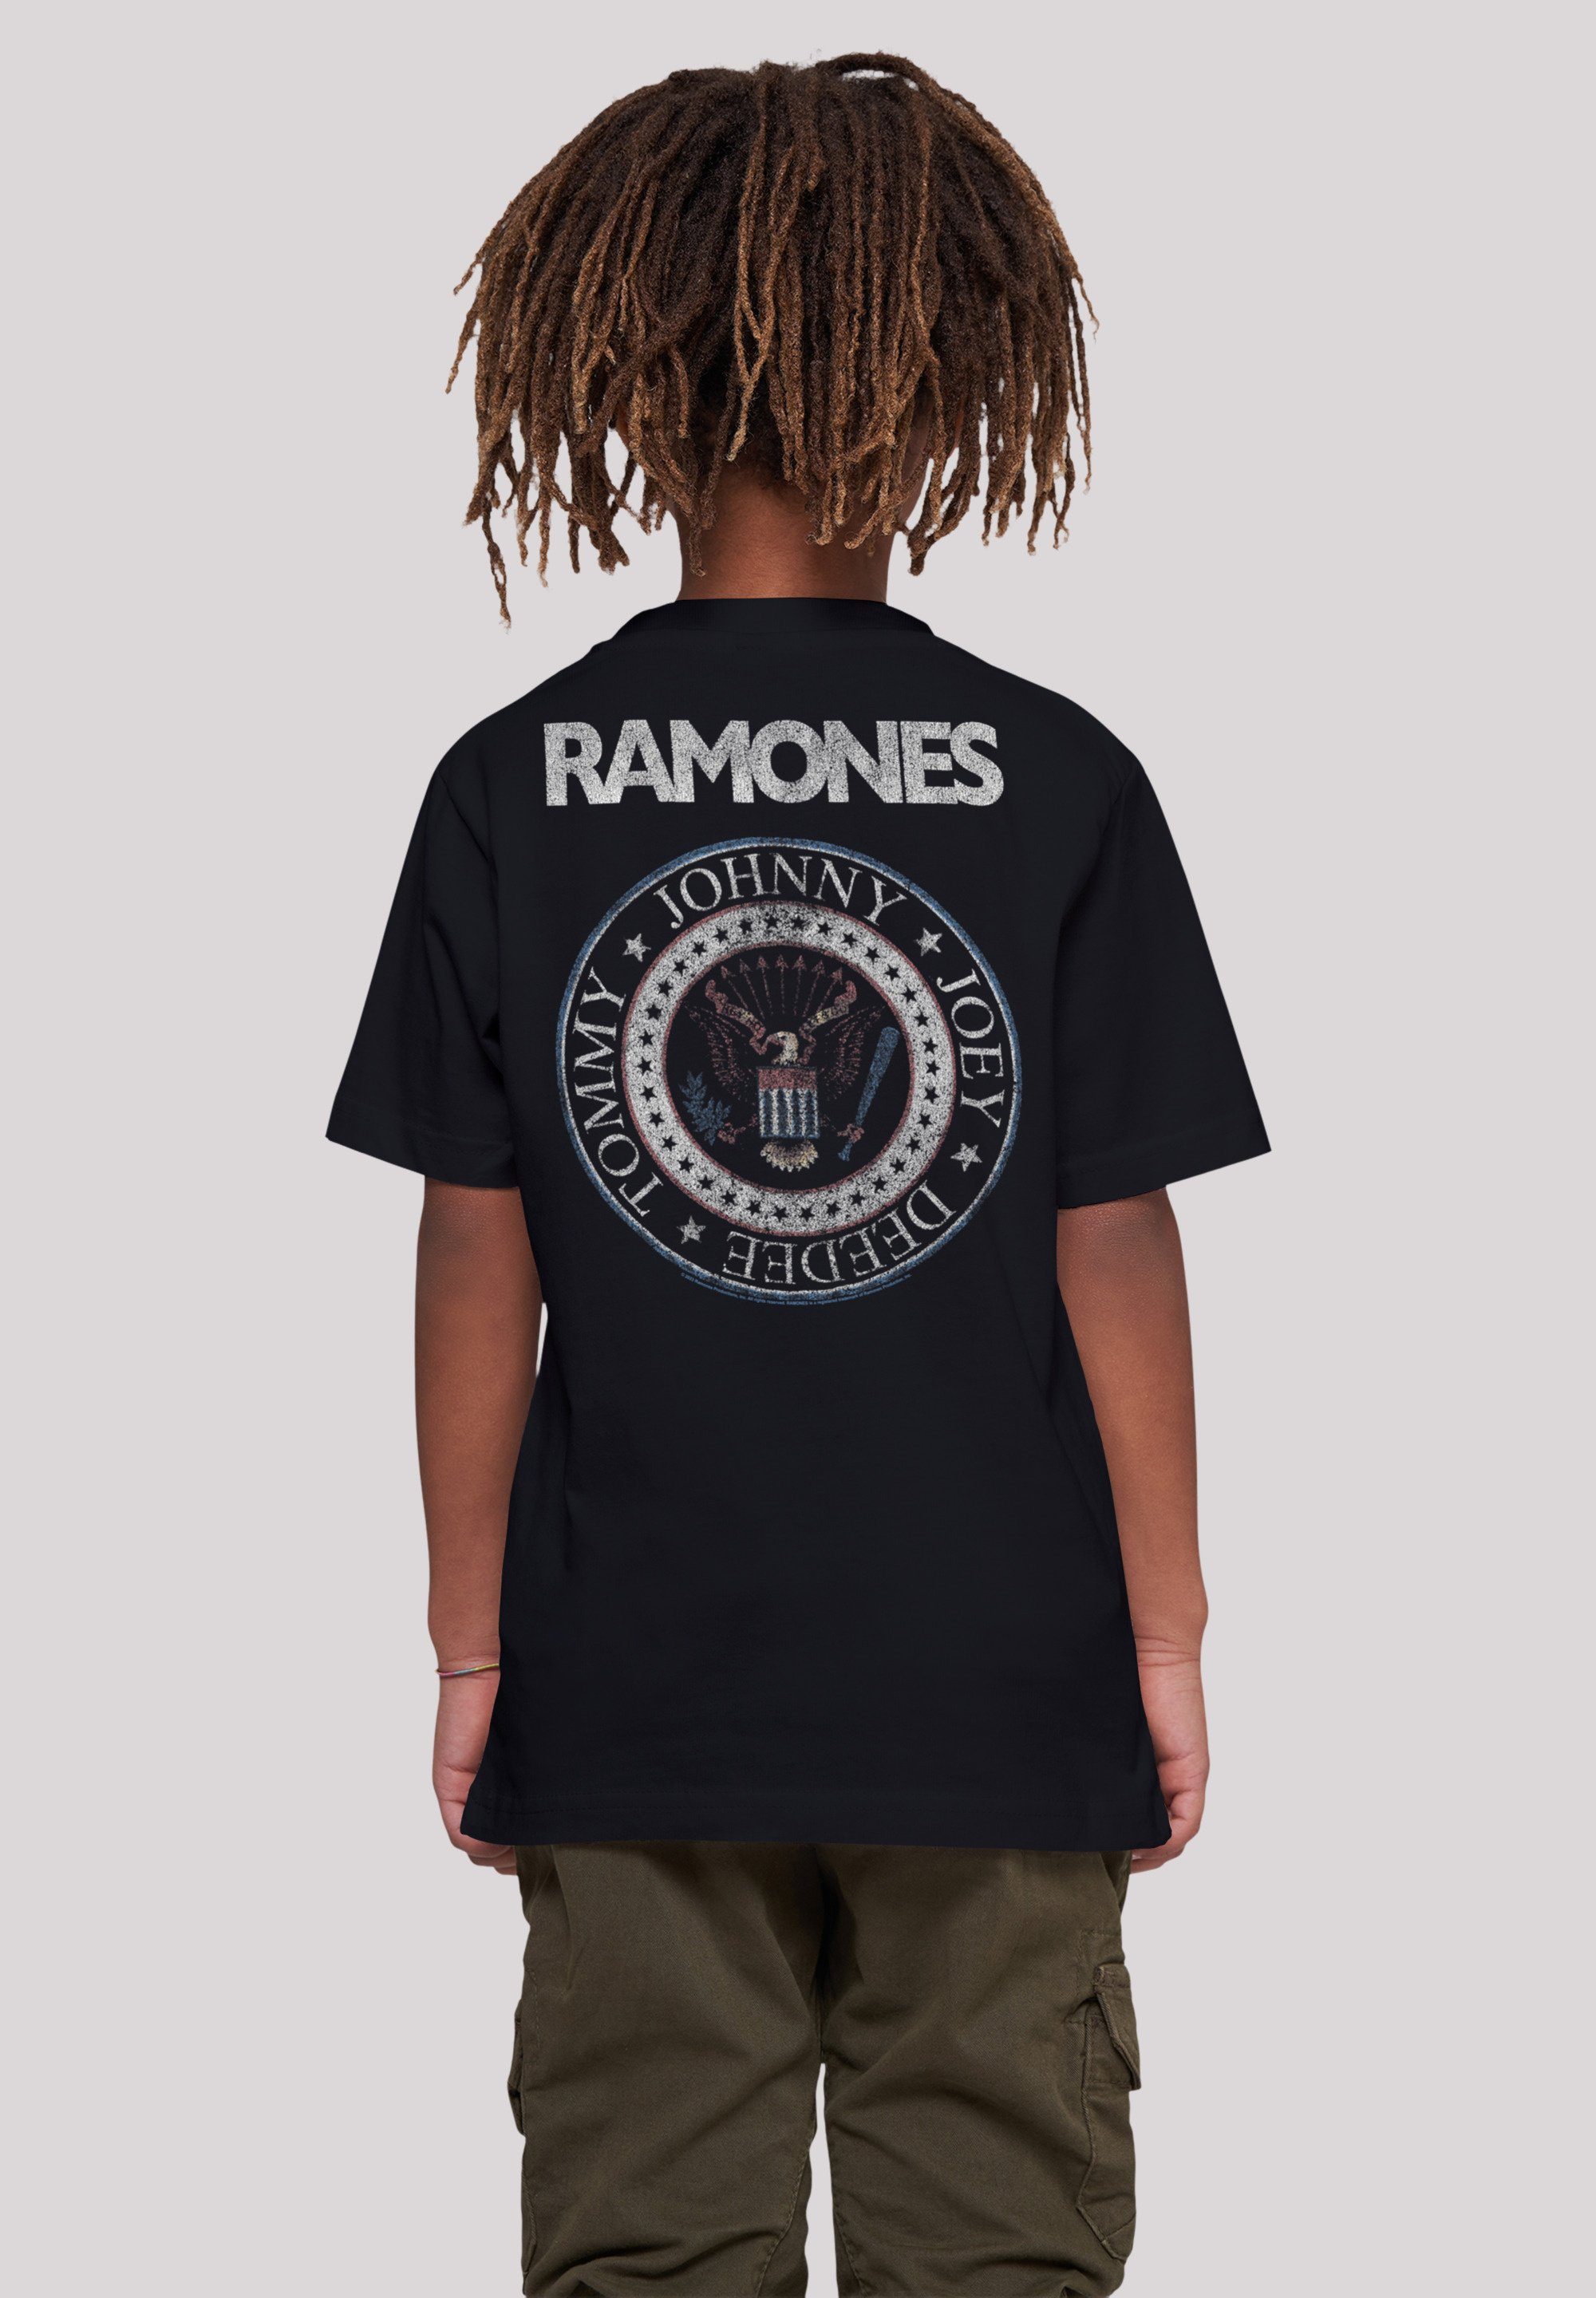 F4NT4STIC T-Shirt Ramones Musik Rock Premium White Red Qualität, And Band Seal Band, Rock-Musik